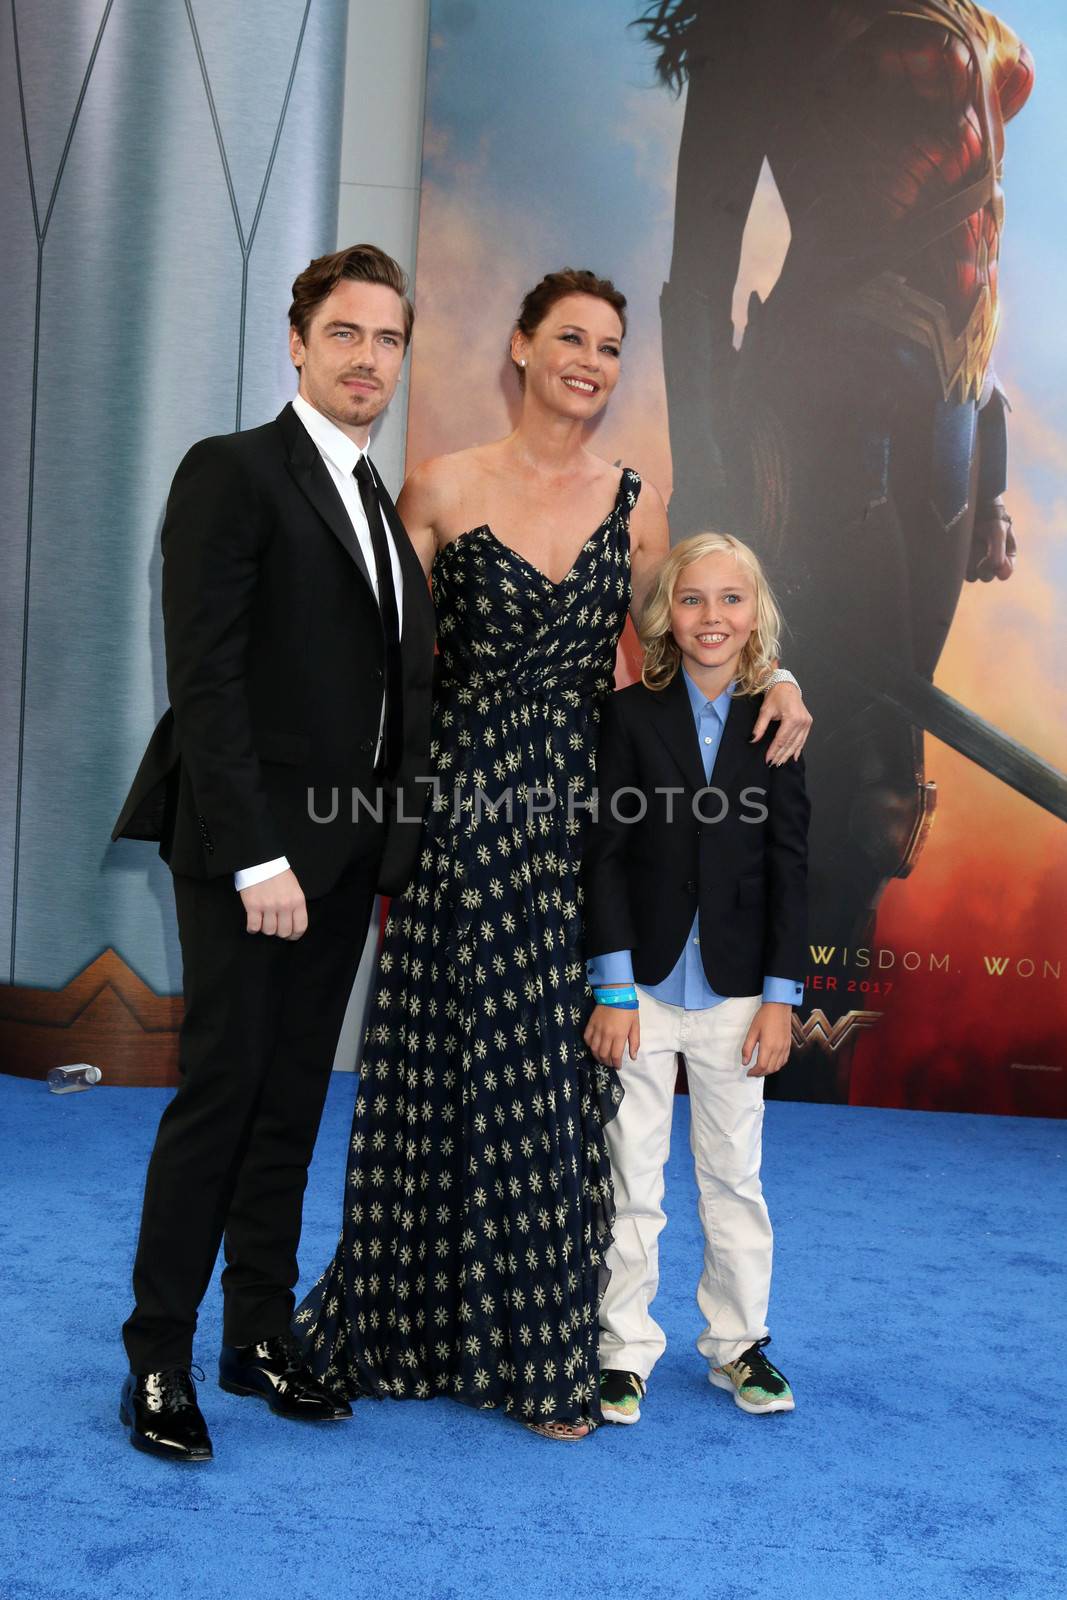 Sebastian Sartor, Connie Nielsen, Bryce Thadeus Ulrich-Nielsen
at the "Wonder Woman" Premiere, Pantages, Hollywood, CA 05-25-17/ImageCollect by ImageCollect